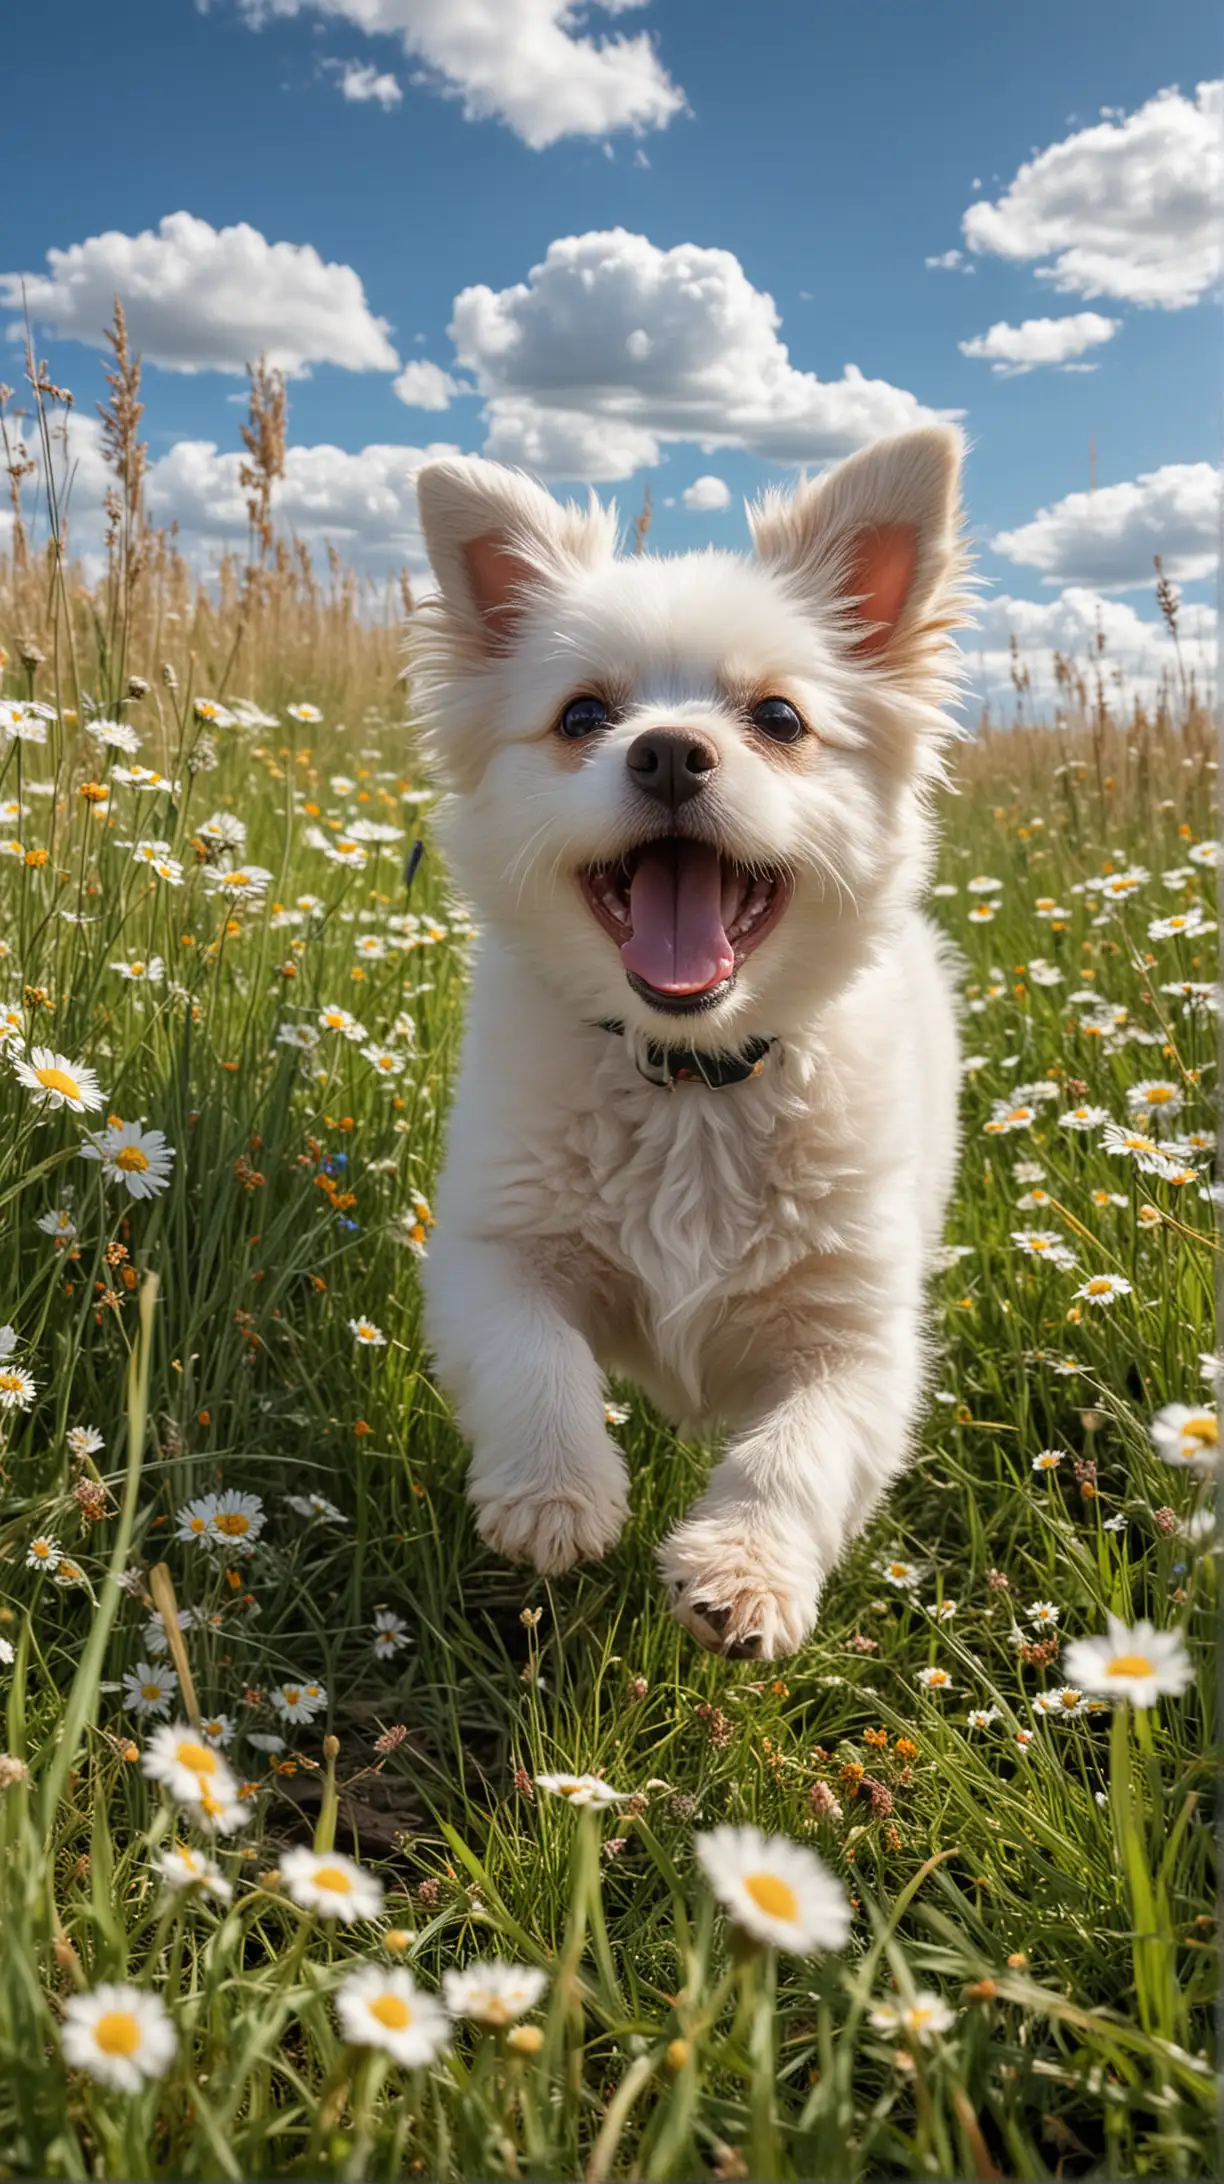 Joyful White and Brown Puppy Frolicking in Flowery Meadow